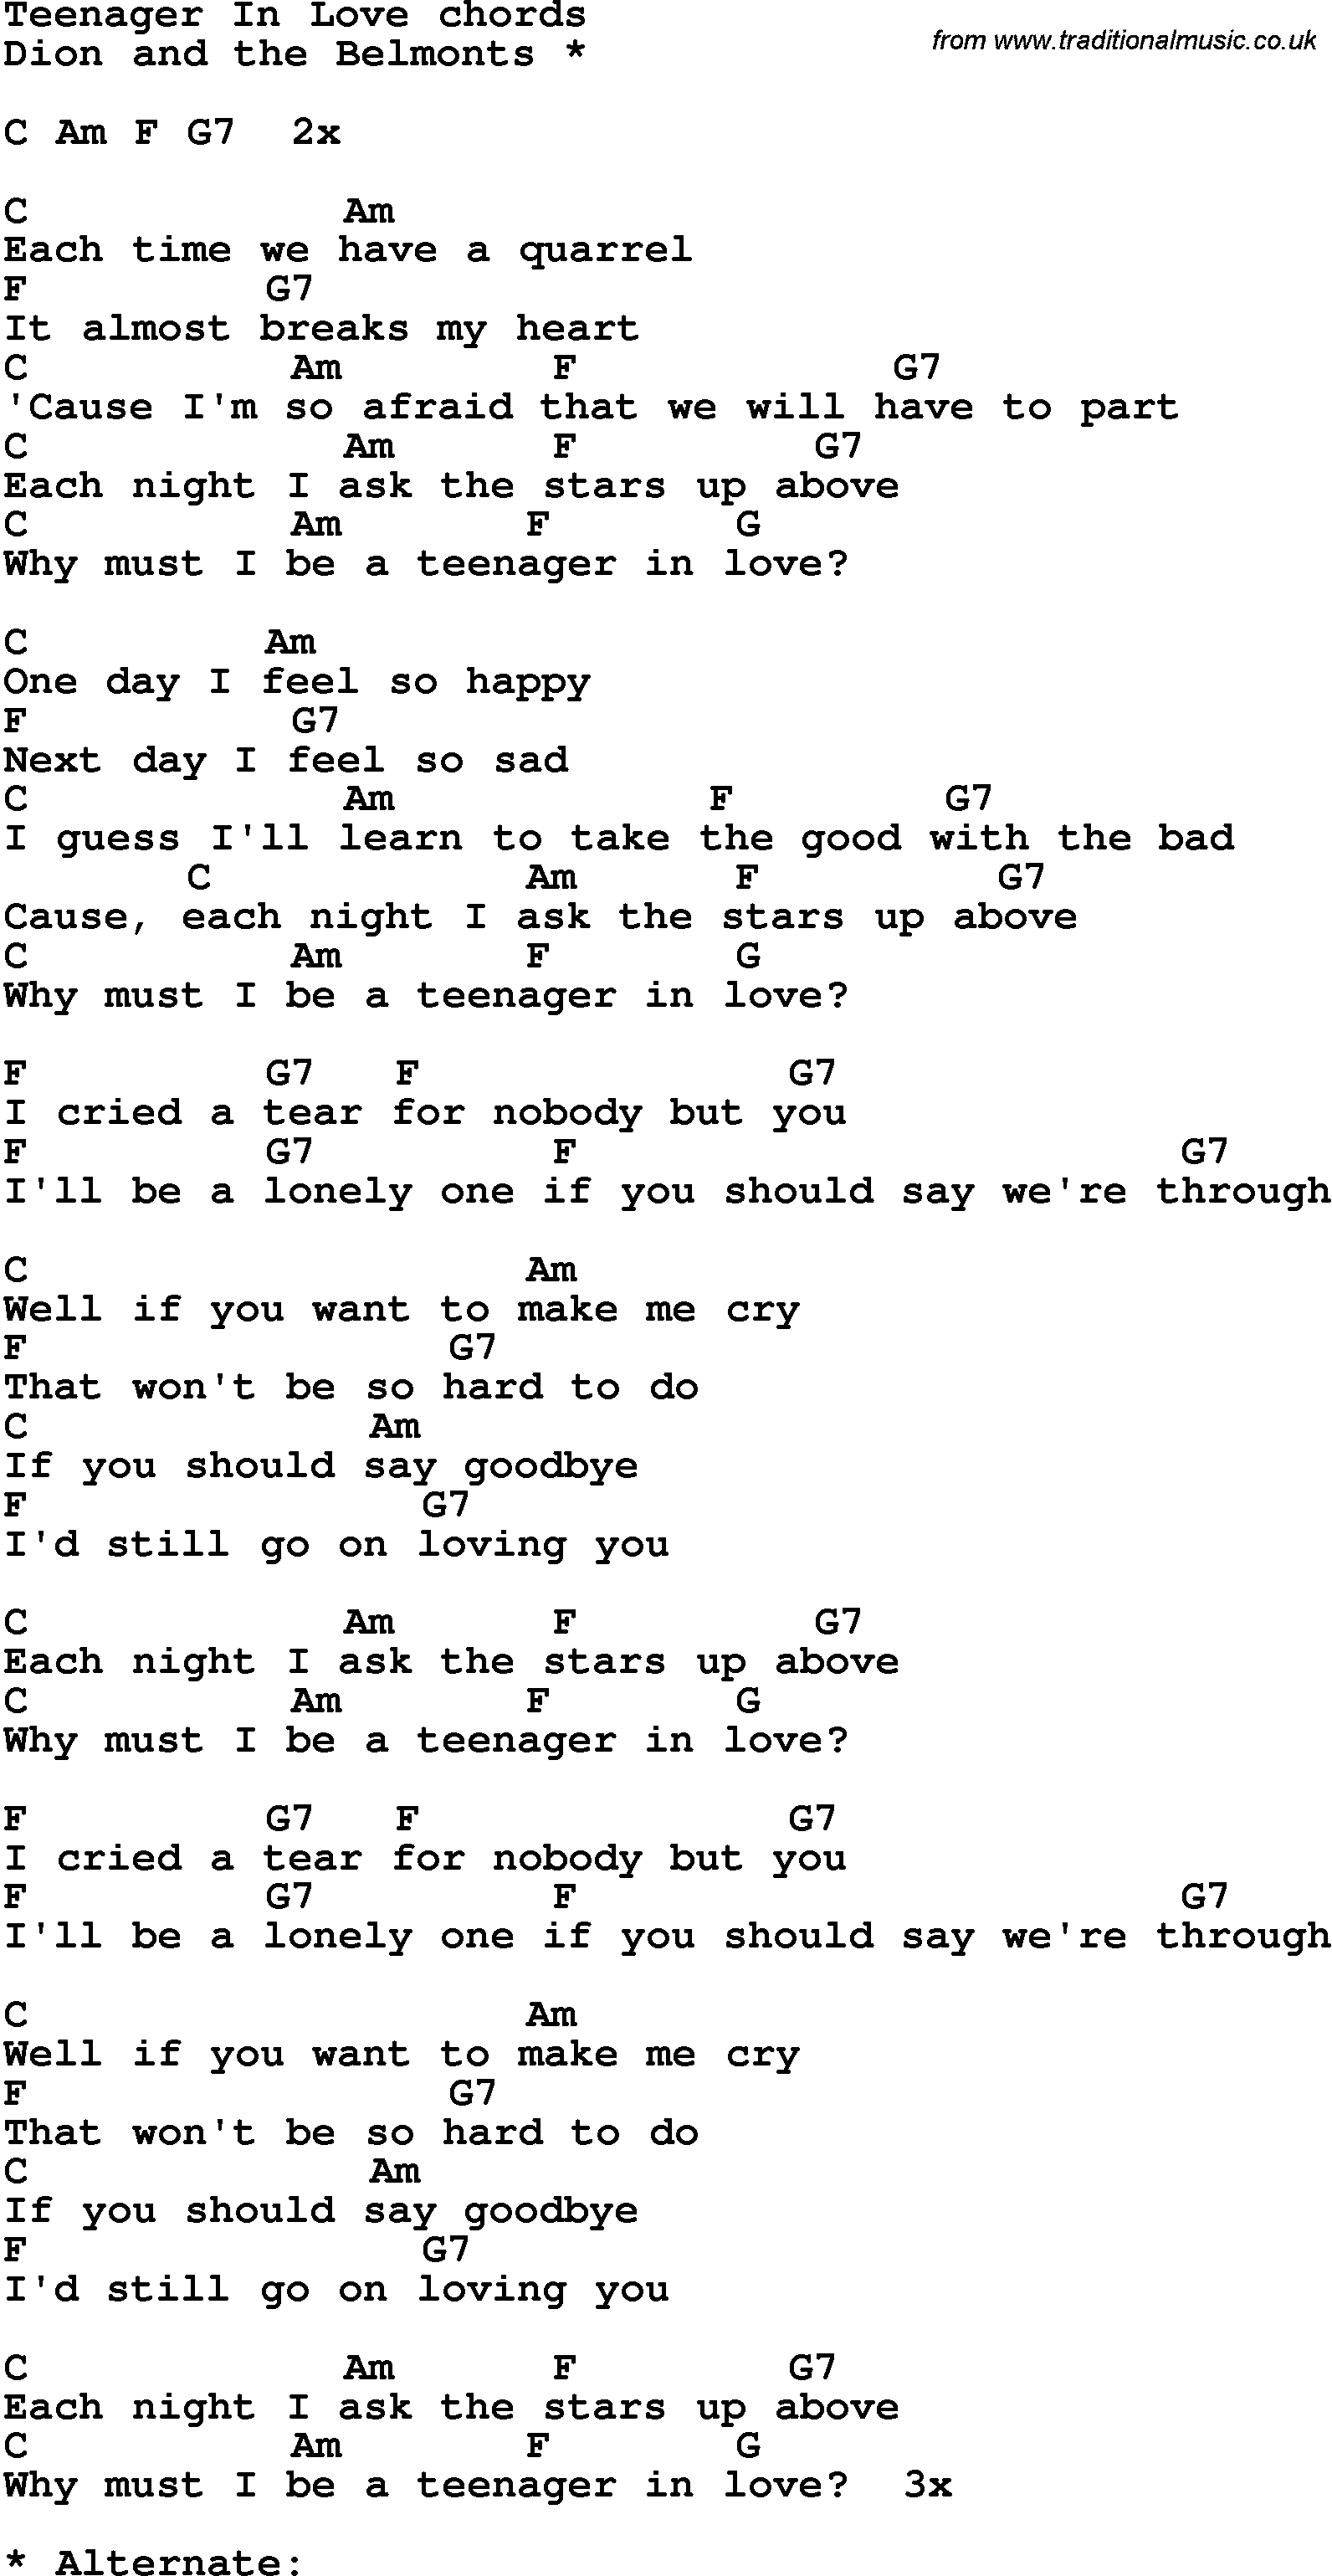 Song Lyrics with guitar chords for Teenager In Love - Dion and the Belmonts